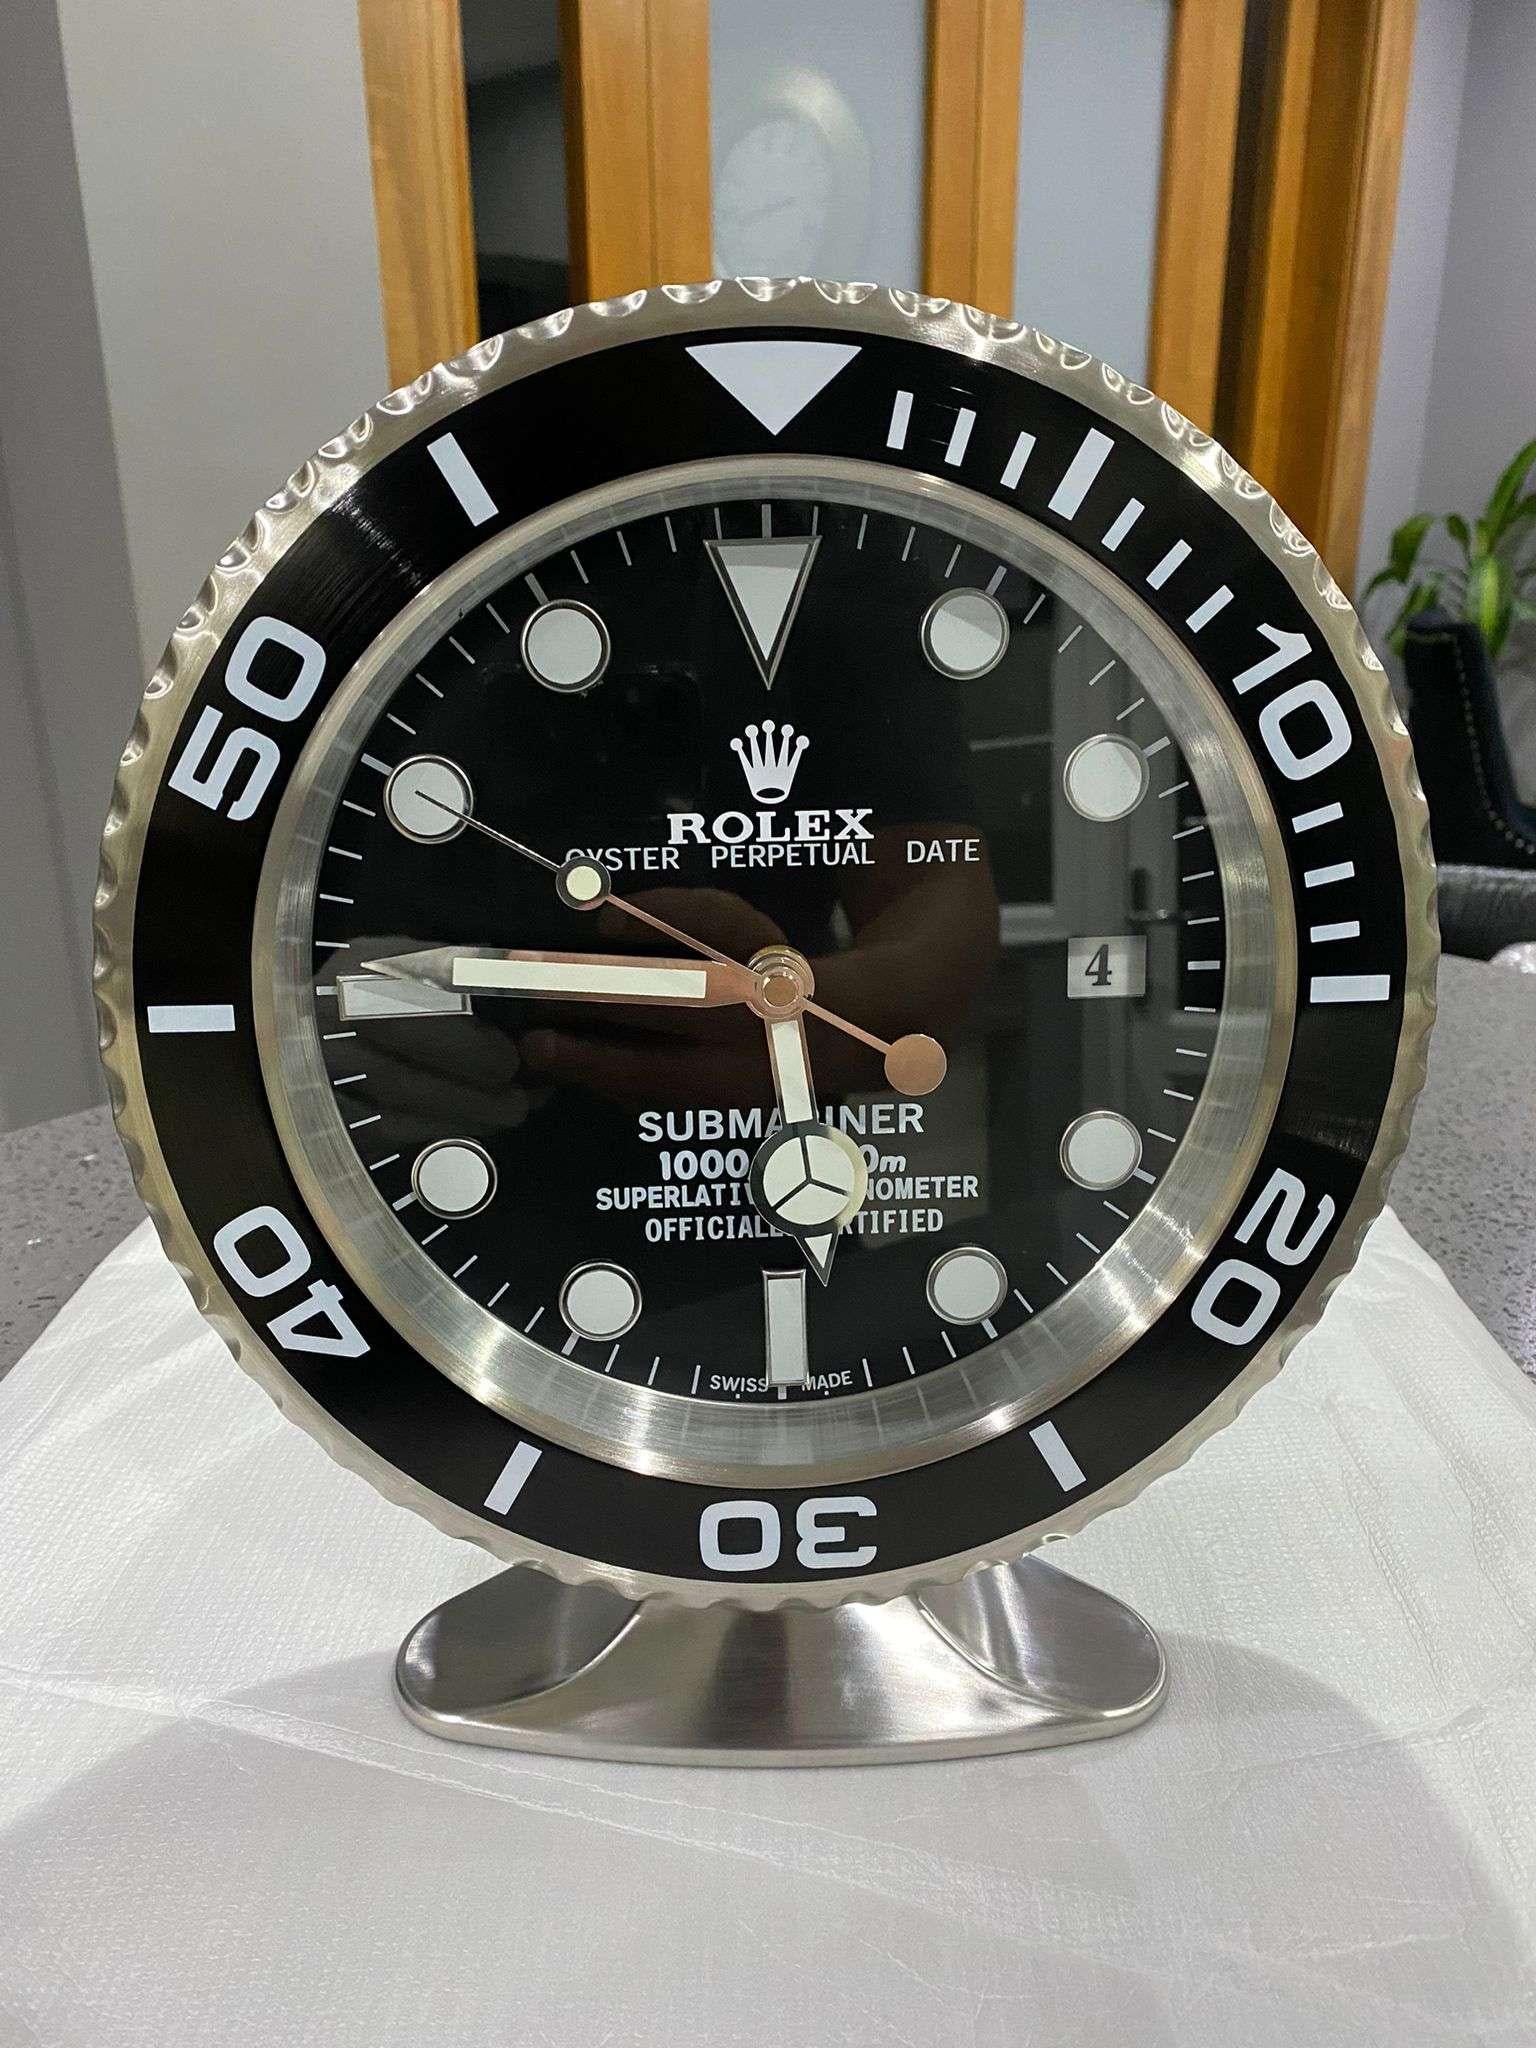 ROLEX Officially Certified Oyster Perpetual black Submariner Desk Clock 
Luminous hands.
Fully functional date.
Sweeping hands.
Quartz movement.
Good condition, working.
Free international shipping.